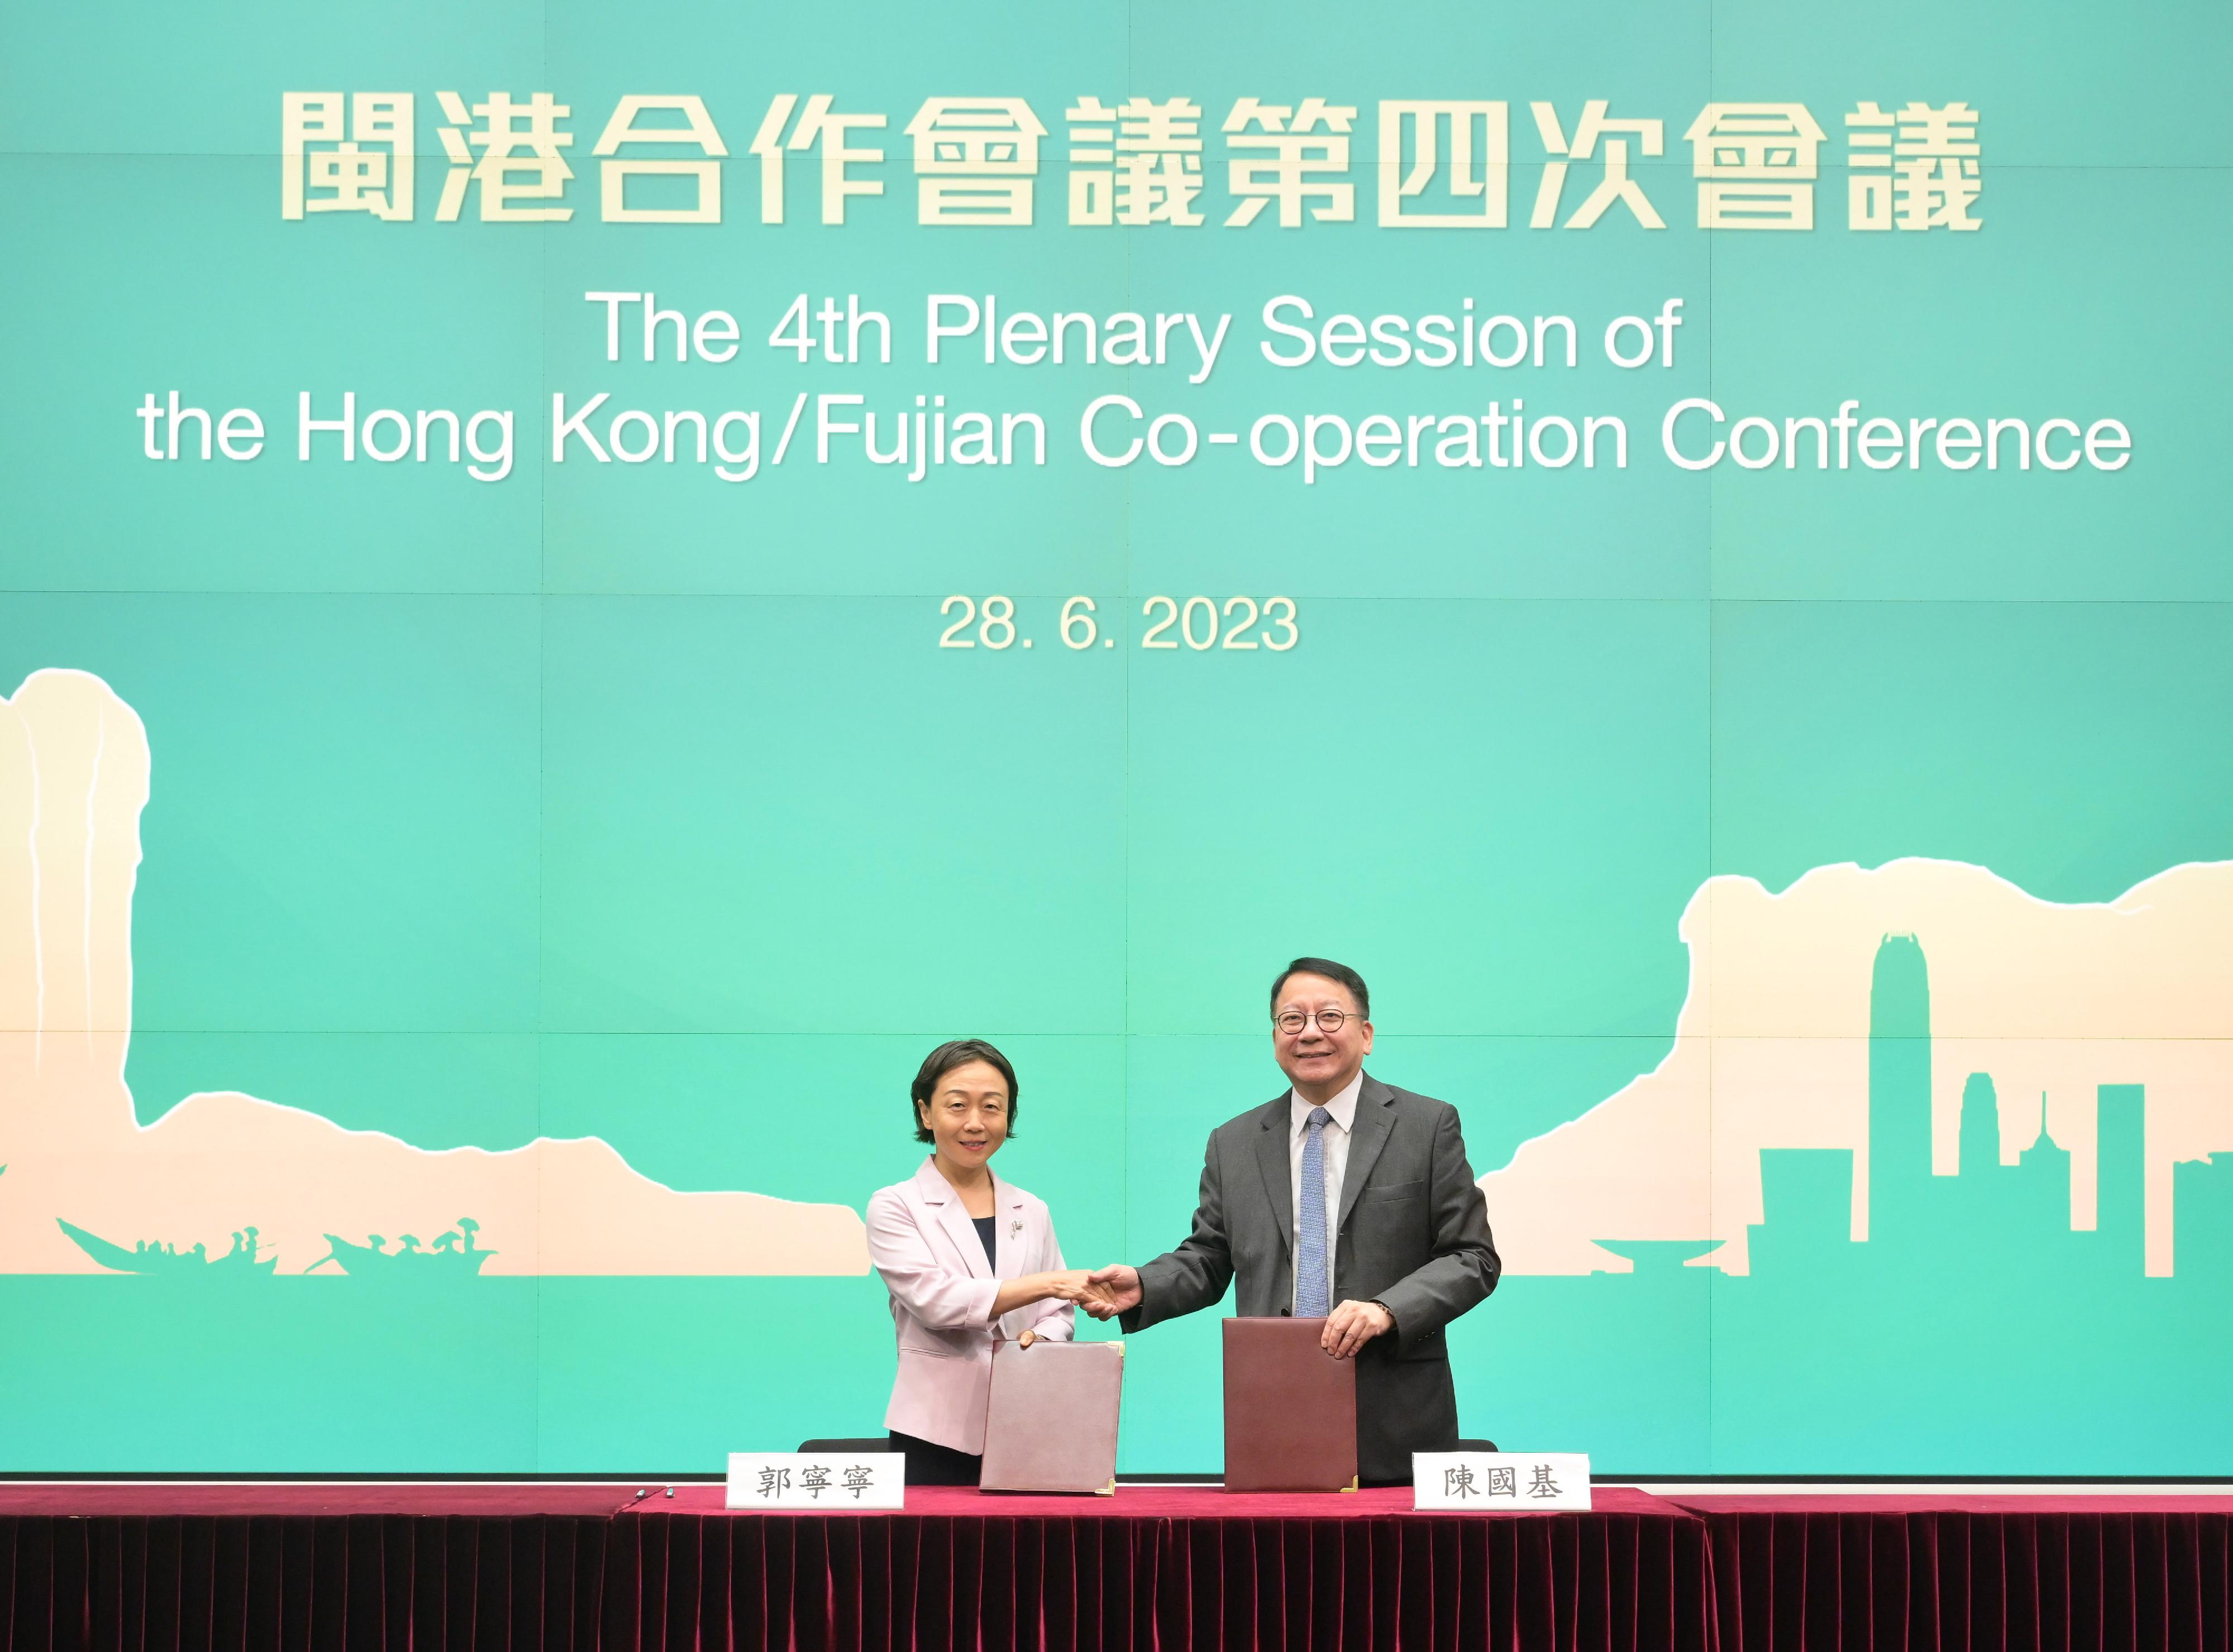 The Chief Secretary for Administration, Mr Chan Kwok-ki, and the Executive Vice Governor of Fujian Province, Ms Guo Ningning, co-chaired the Fourth Plenary Session of the Hong Kong/Fujian Co-operation Conference today (June 28) in Hong Kong. Photo shows Mr Chan (right) and Ms Guo (left) signing the "Co-operation Memorandum of the Fourth Plenary Session of the Hong Kong/Fujian Co-operation Conference".
